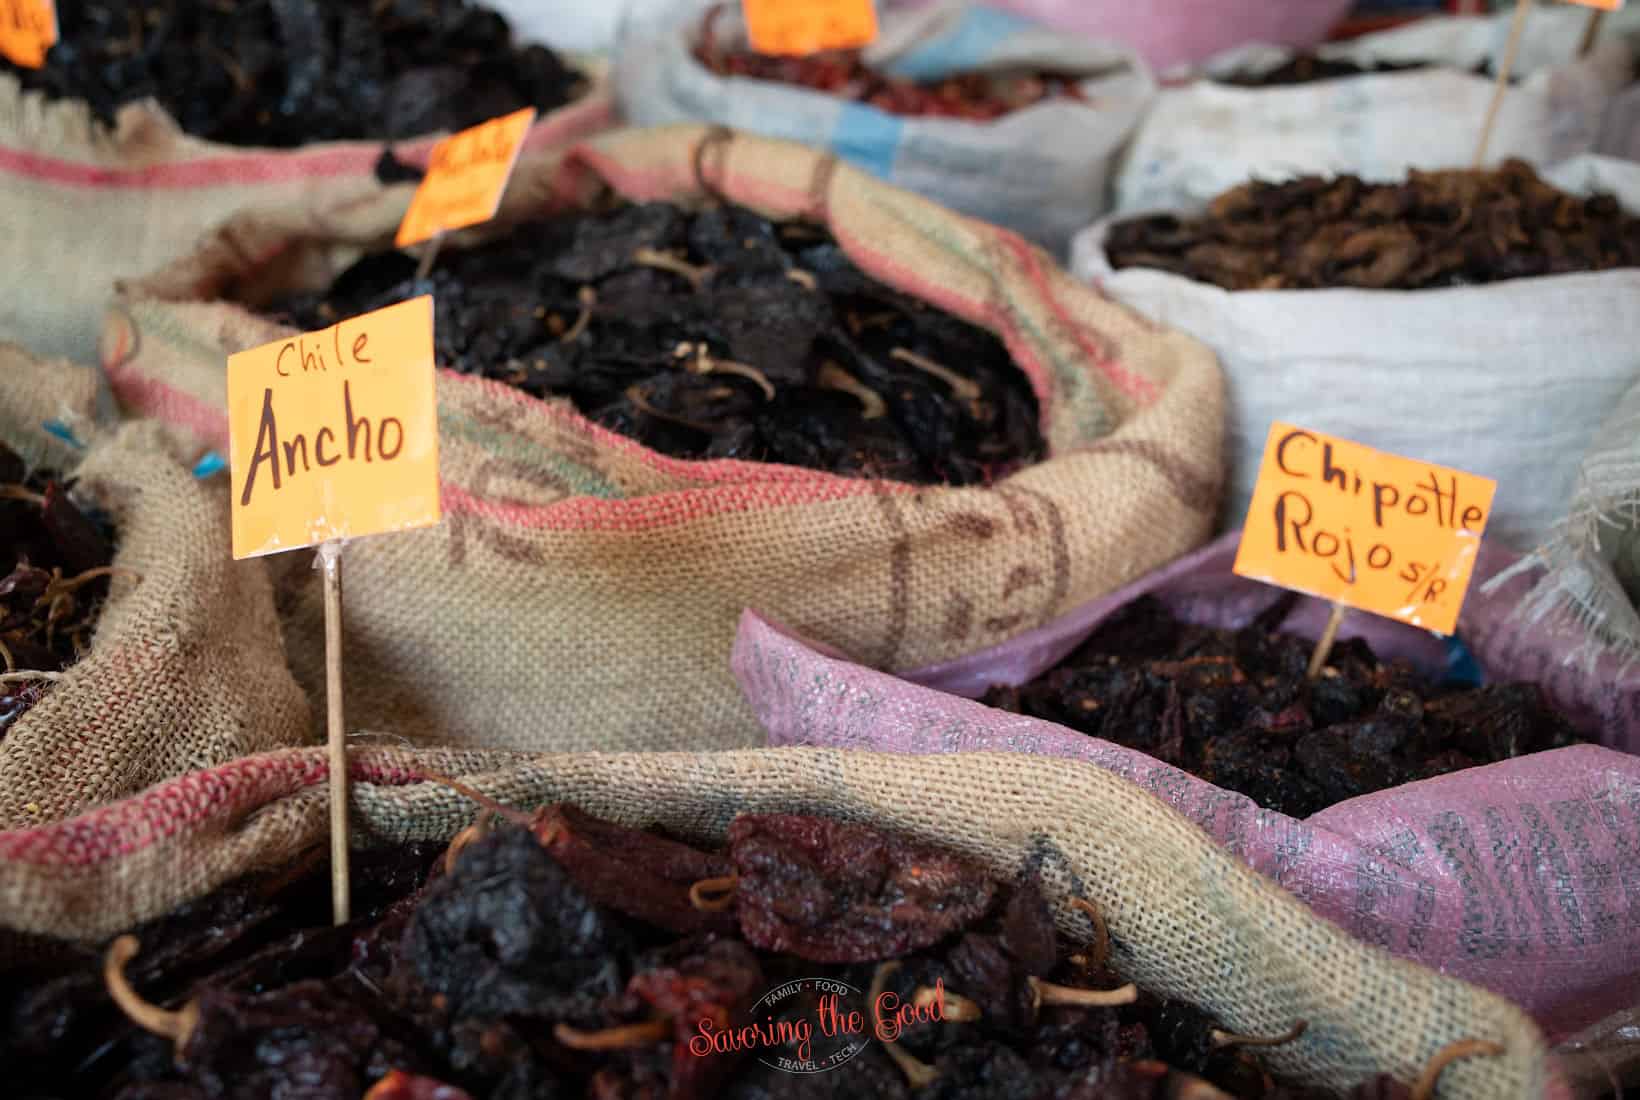 Dried ancho chili peppers at a market in Mexico City.